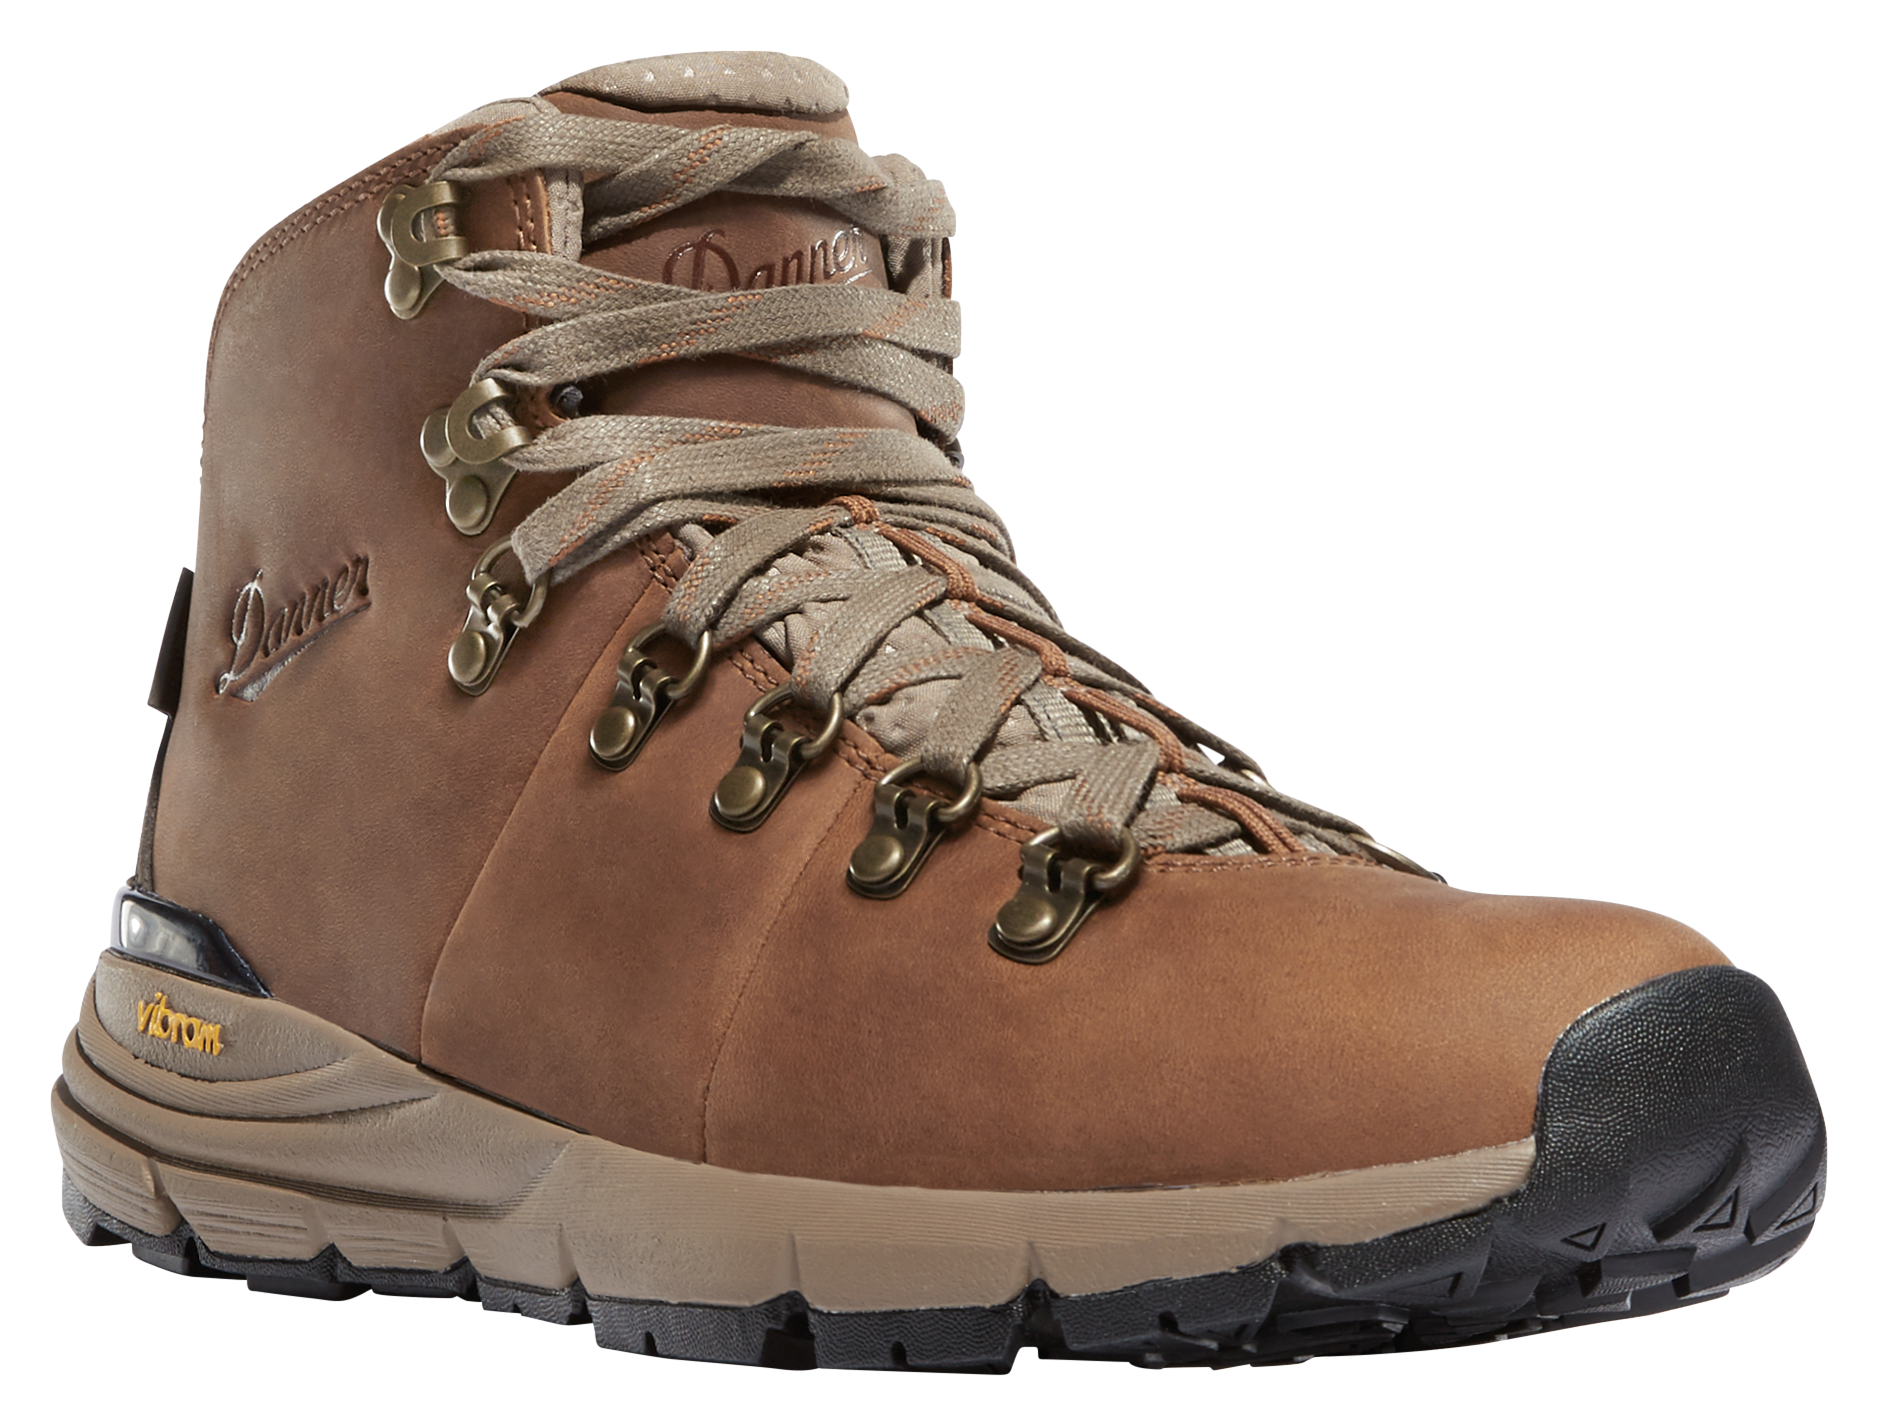 Danner Mountain 600 Leather Waterproof Hiking Boots for Ladies - Rich Brown - 9M